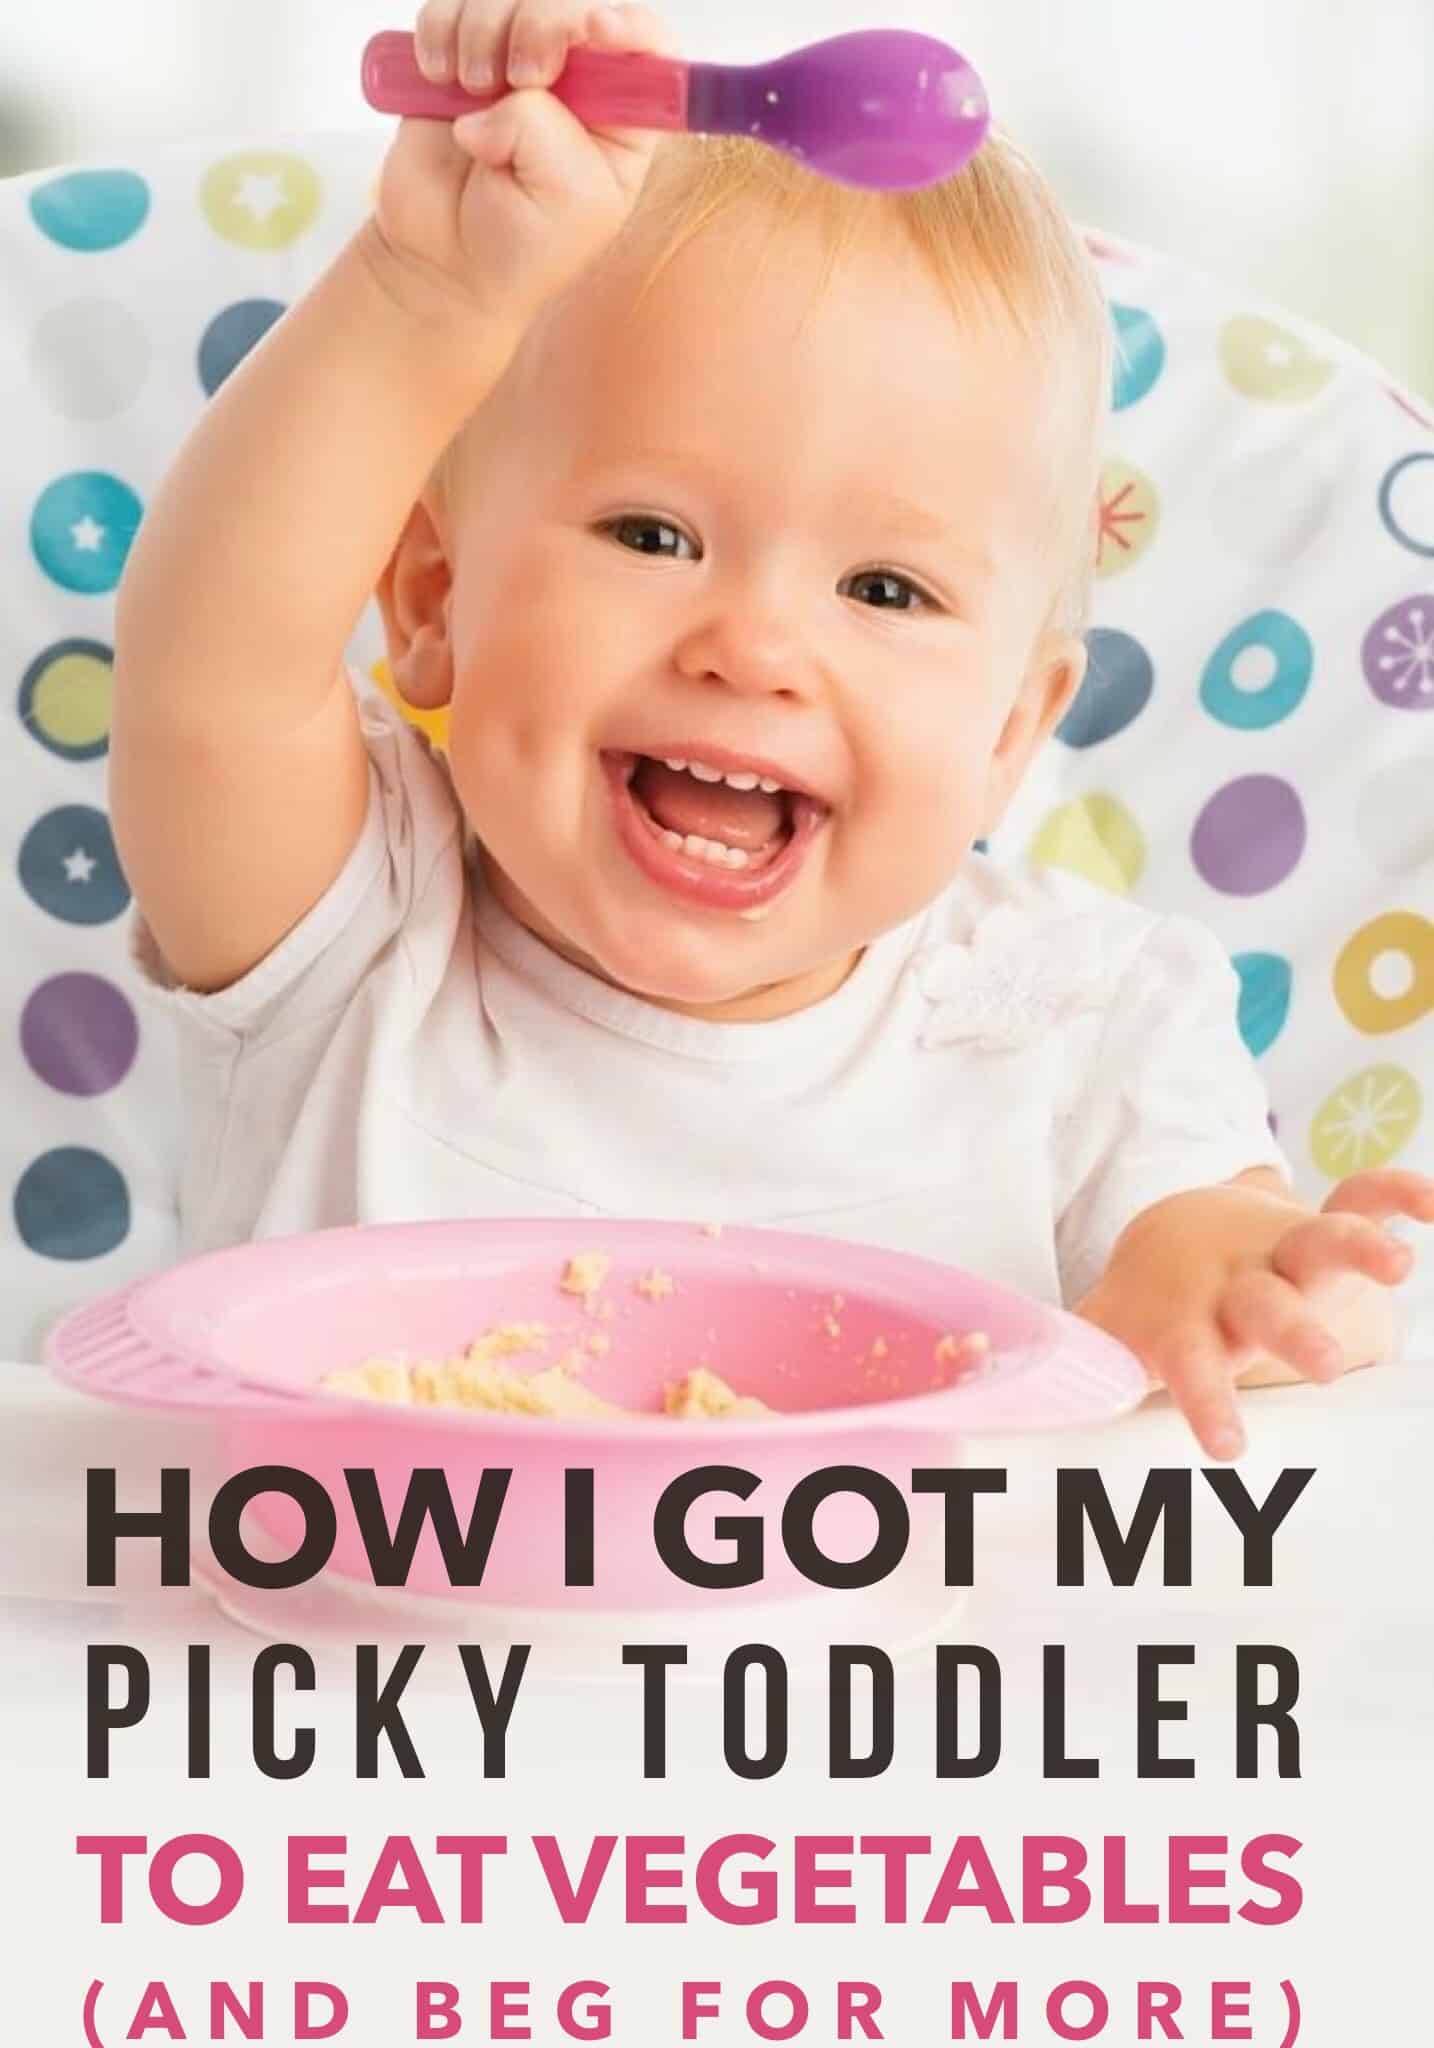 How to Get a Picky Toddler To Eat Vegetables (And Beg For More)